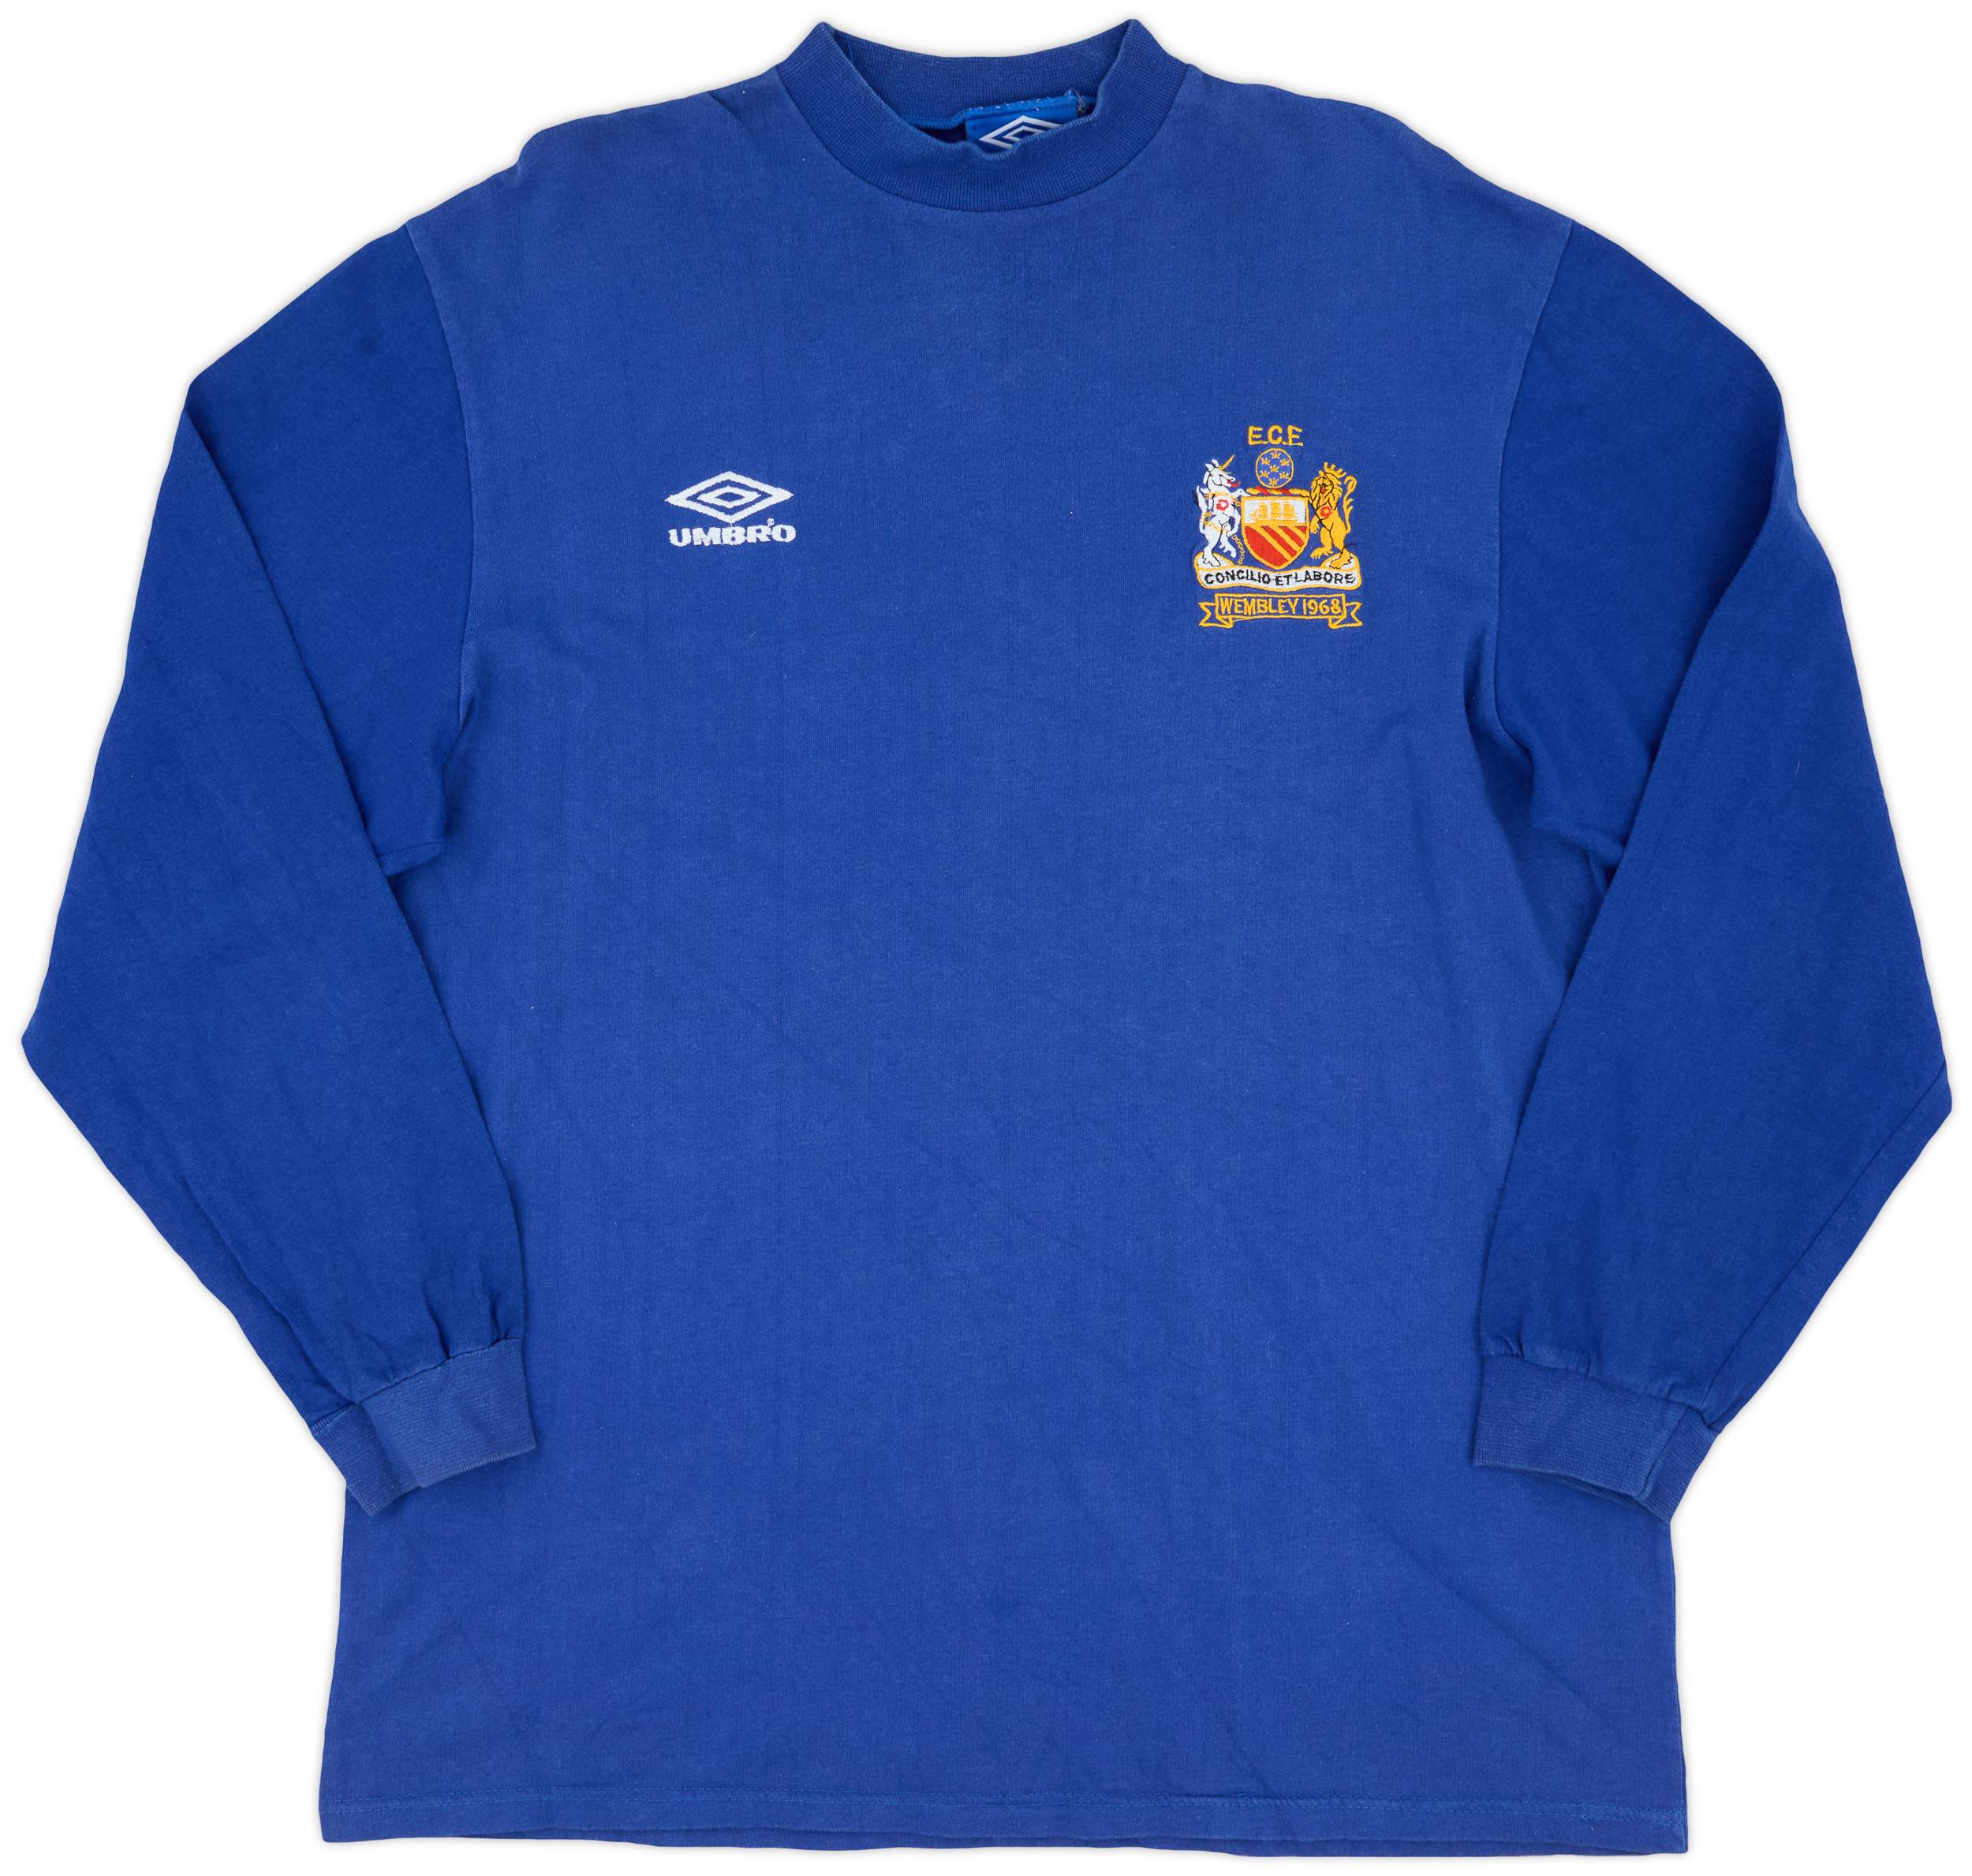 1998 Manchester United '1968 European Cup' Heritage L/S Shirt - 9/10 - (XL)